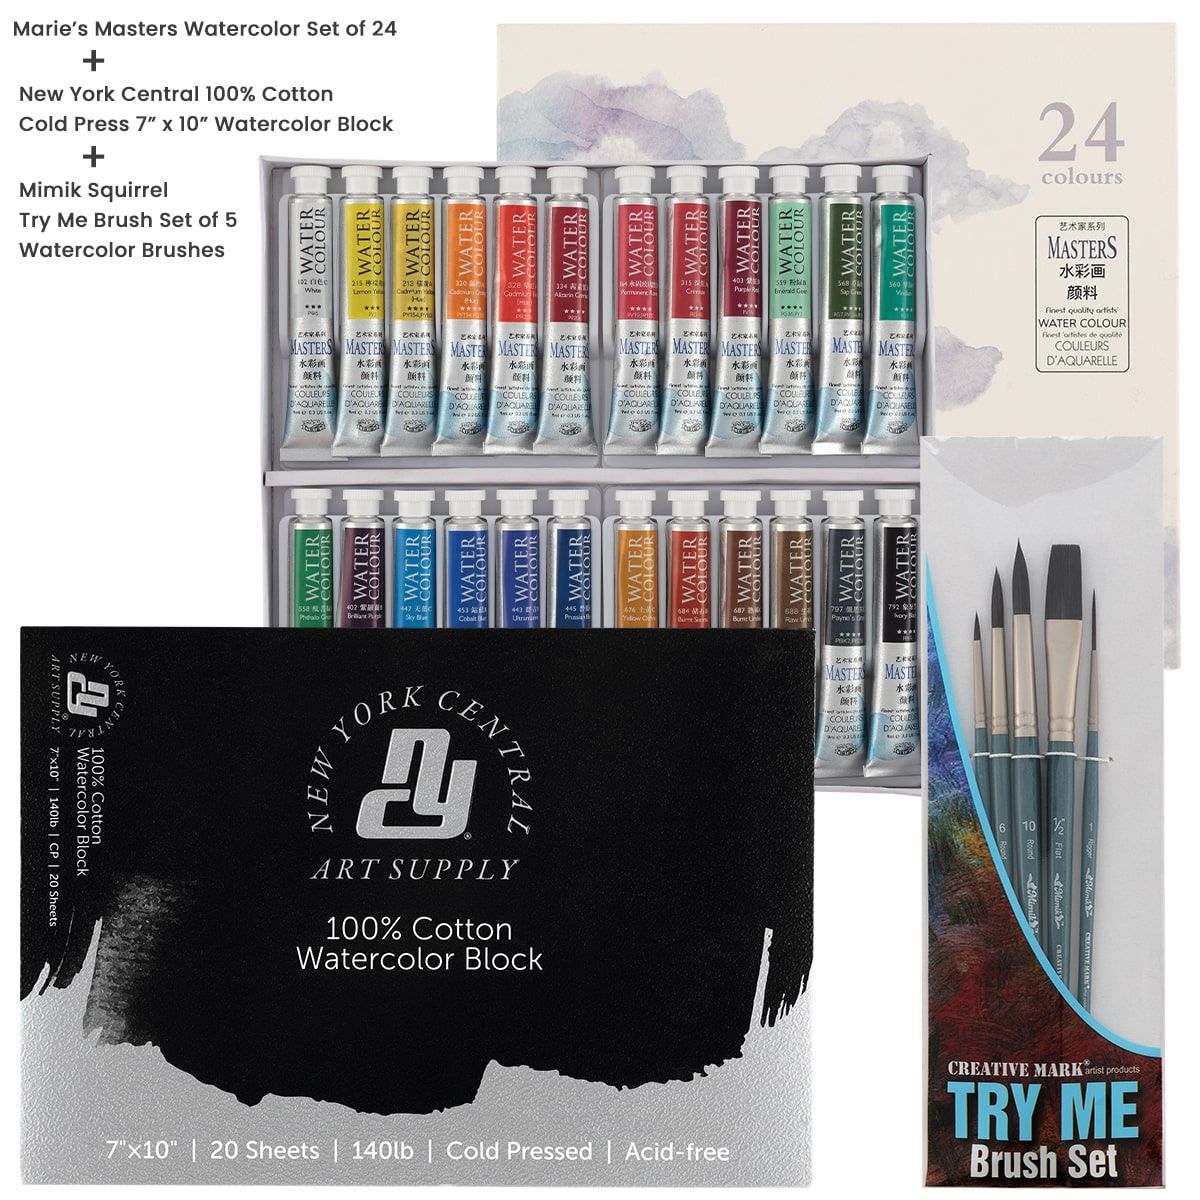 Marie's Master Watercolor Set of 24 with NY Central Cold Press Block and Mimik Brushes